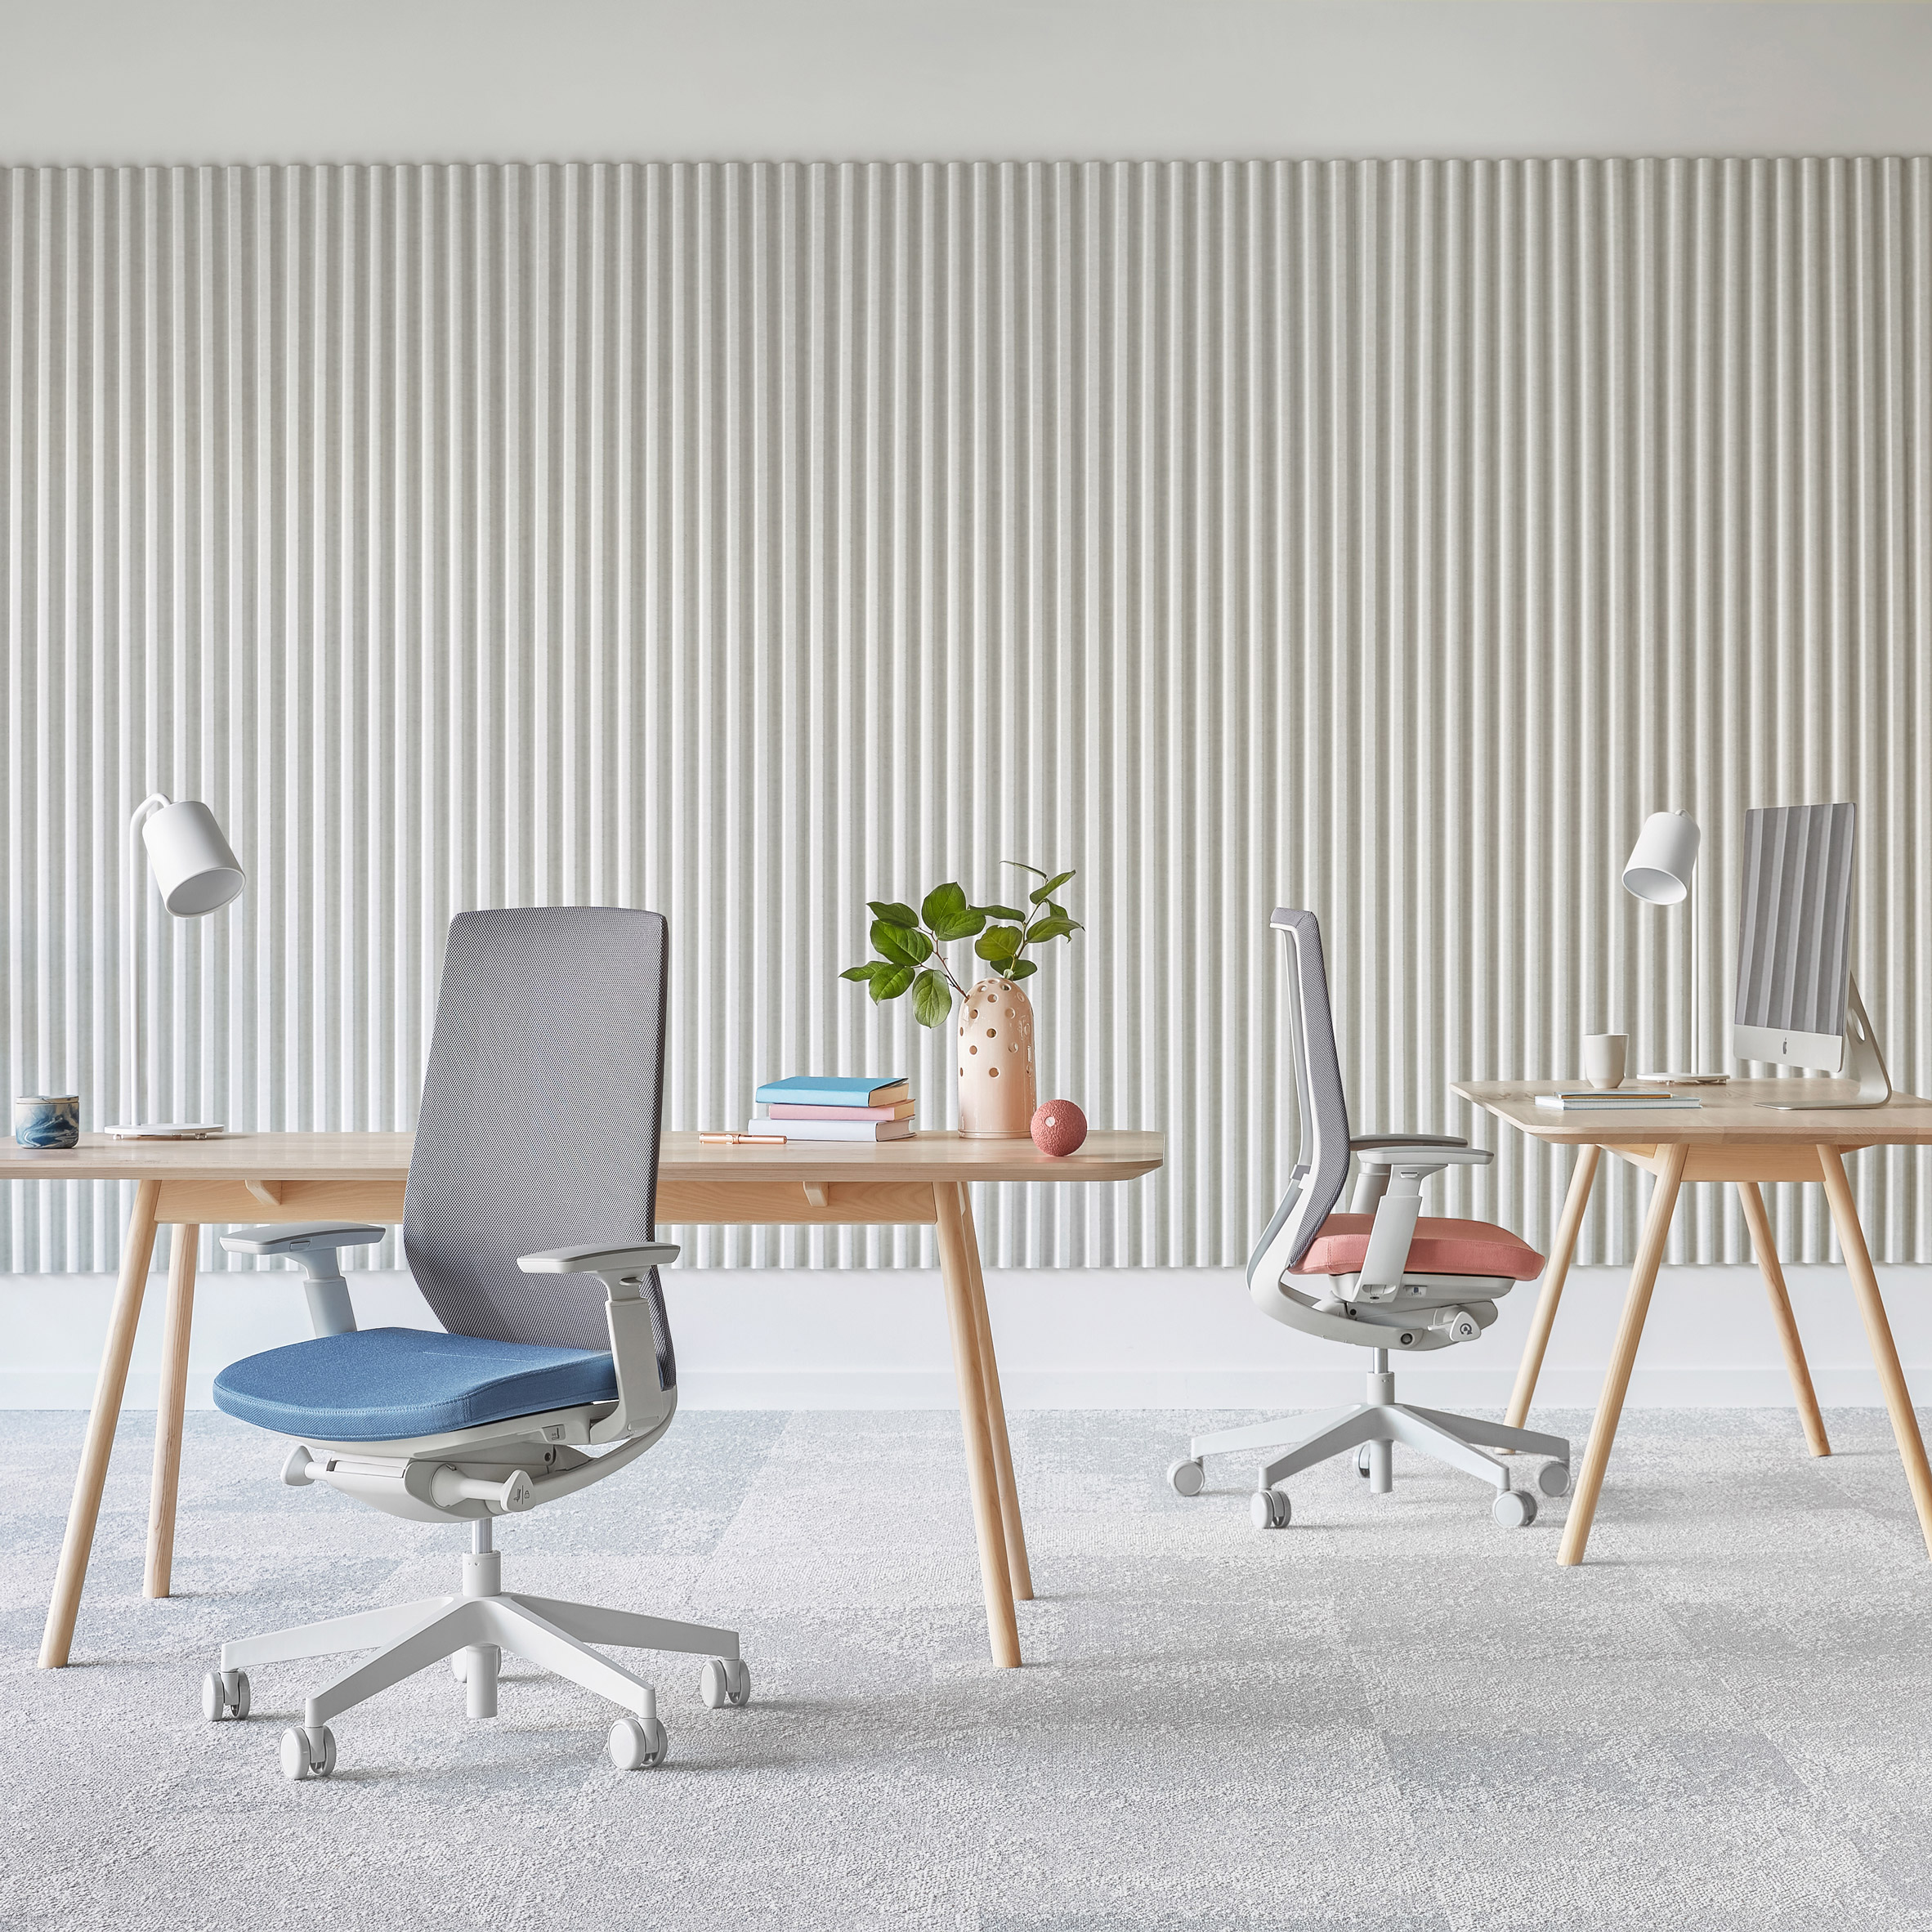 AccisPro office chair by ITO Design for Profim